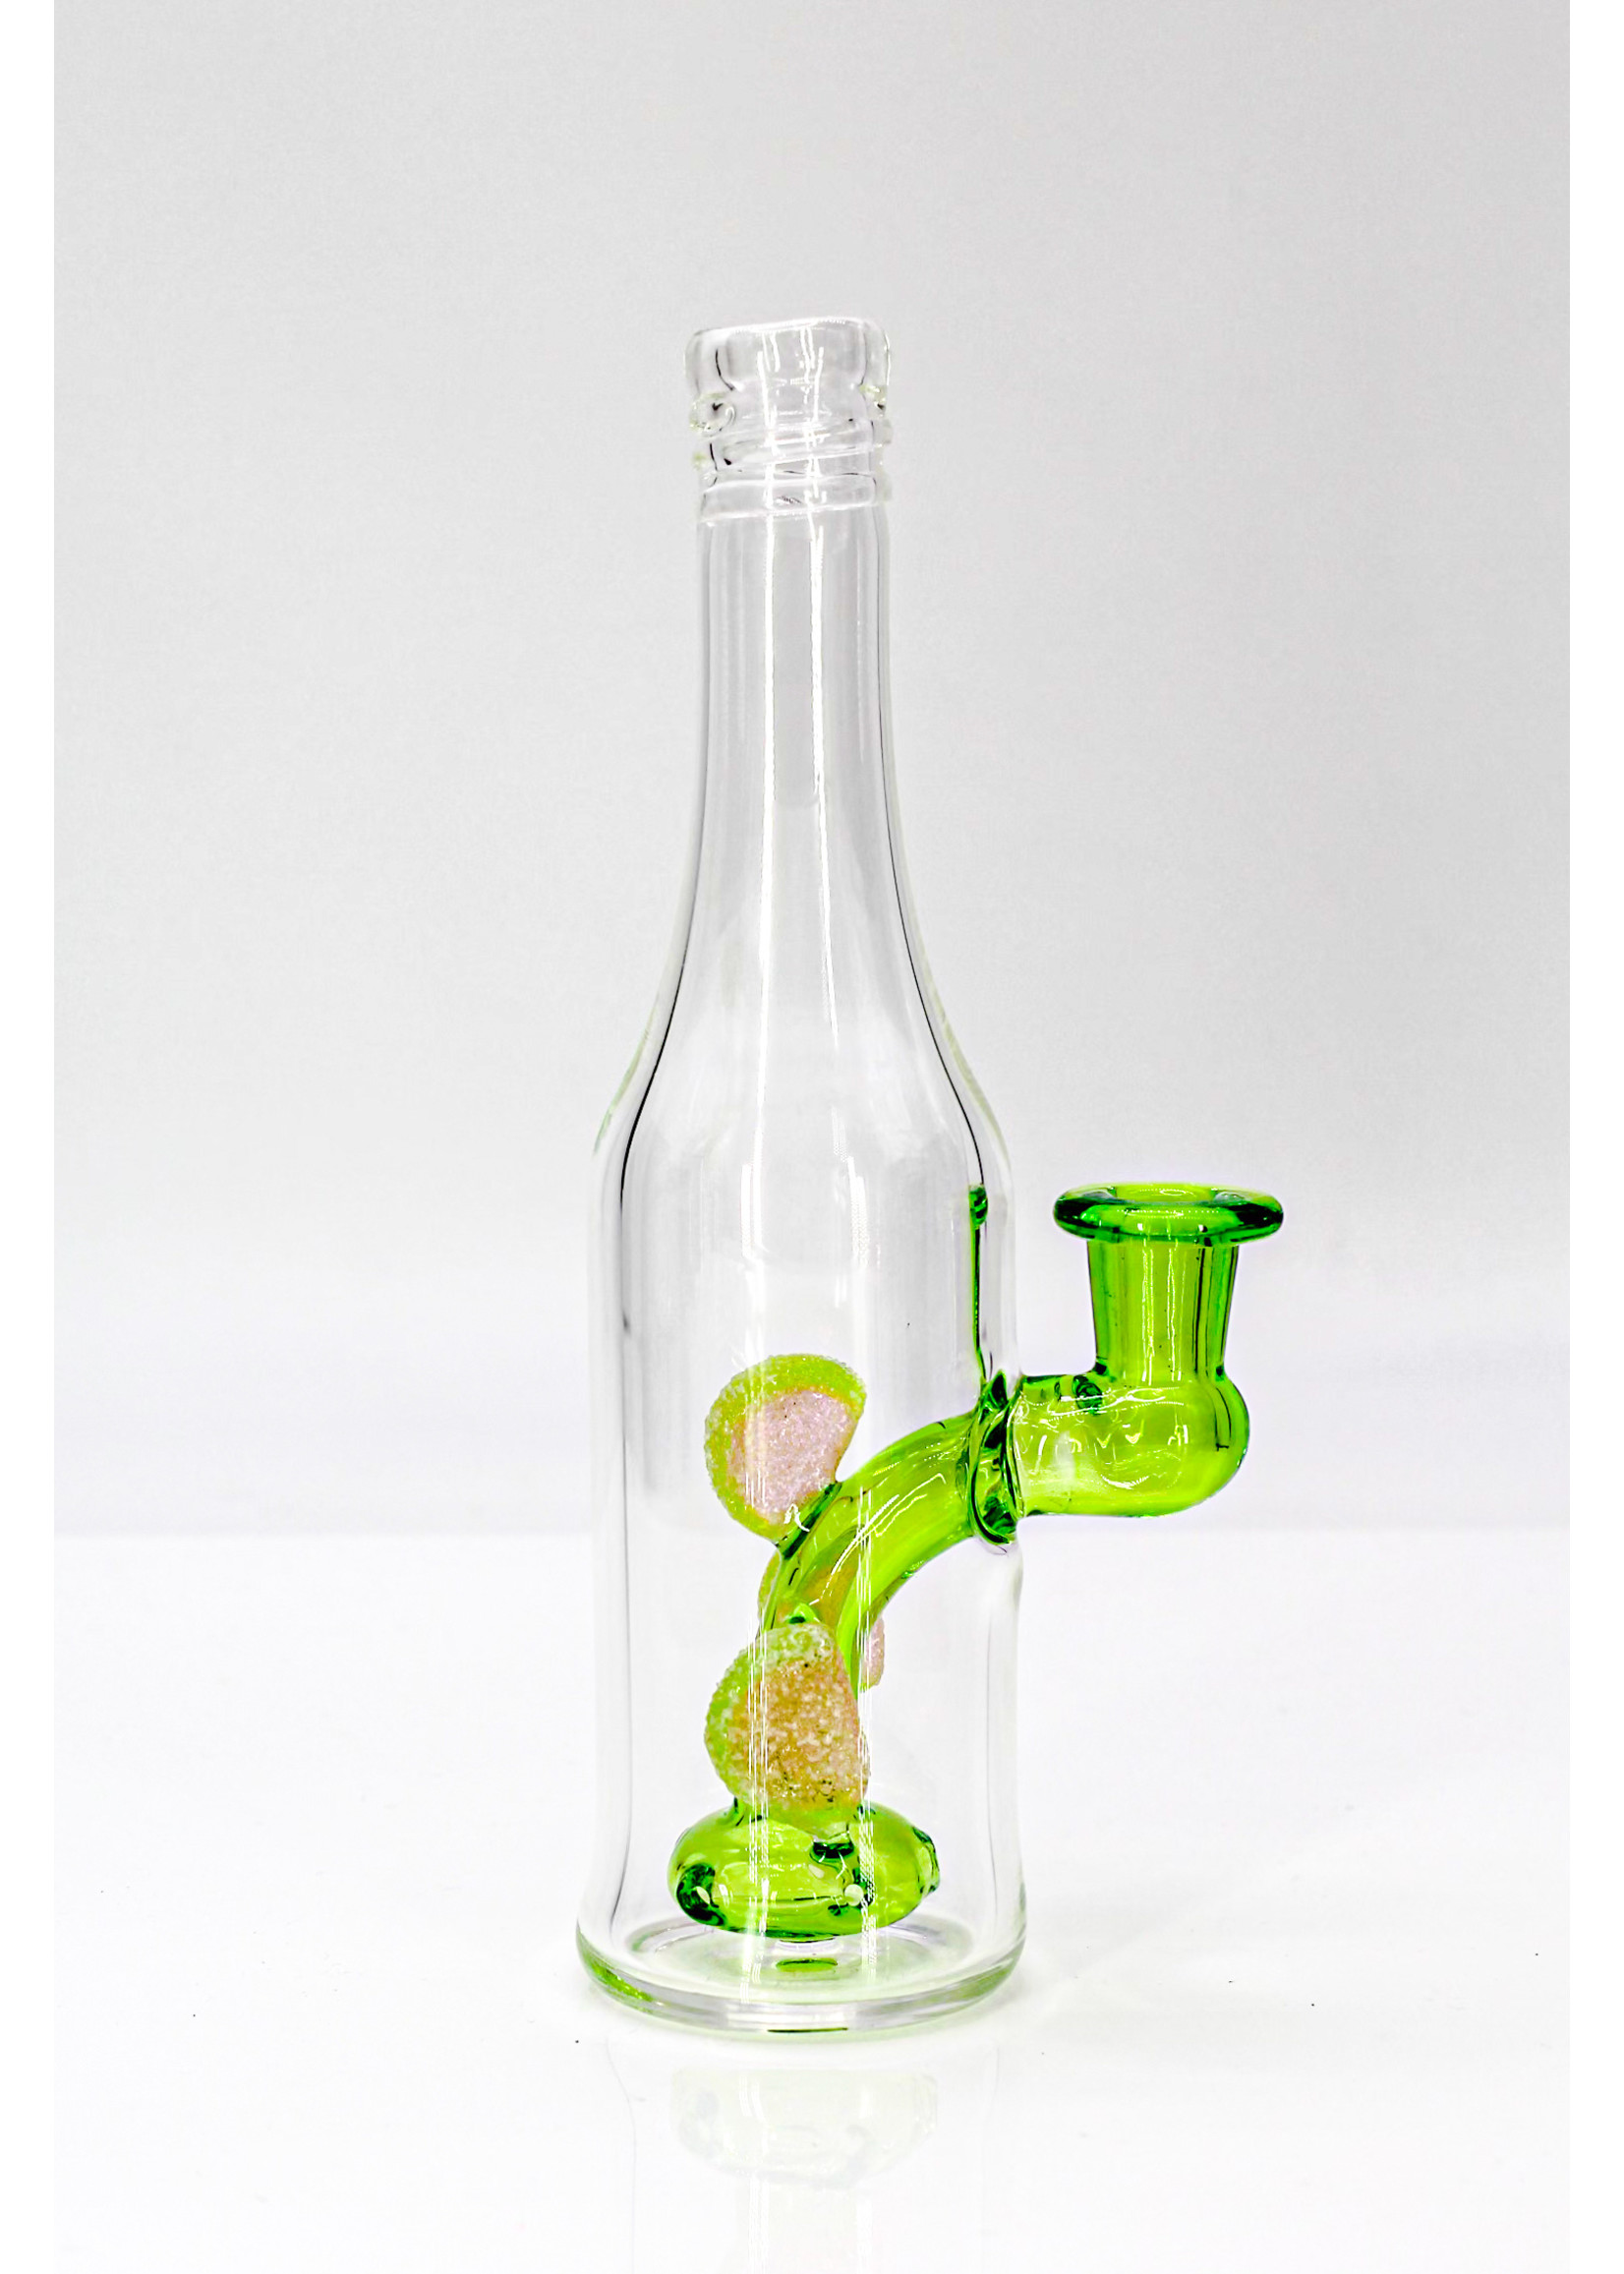 Emperial Glass Emperial Glass Bottle Rig #5